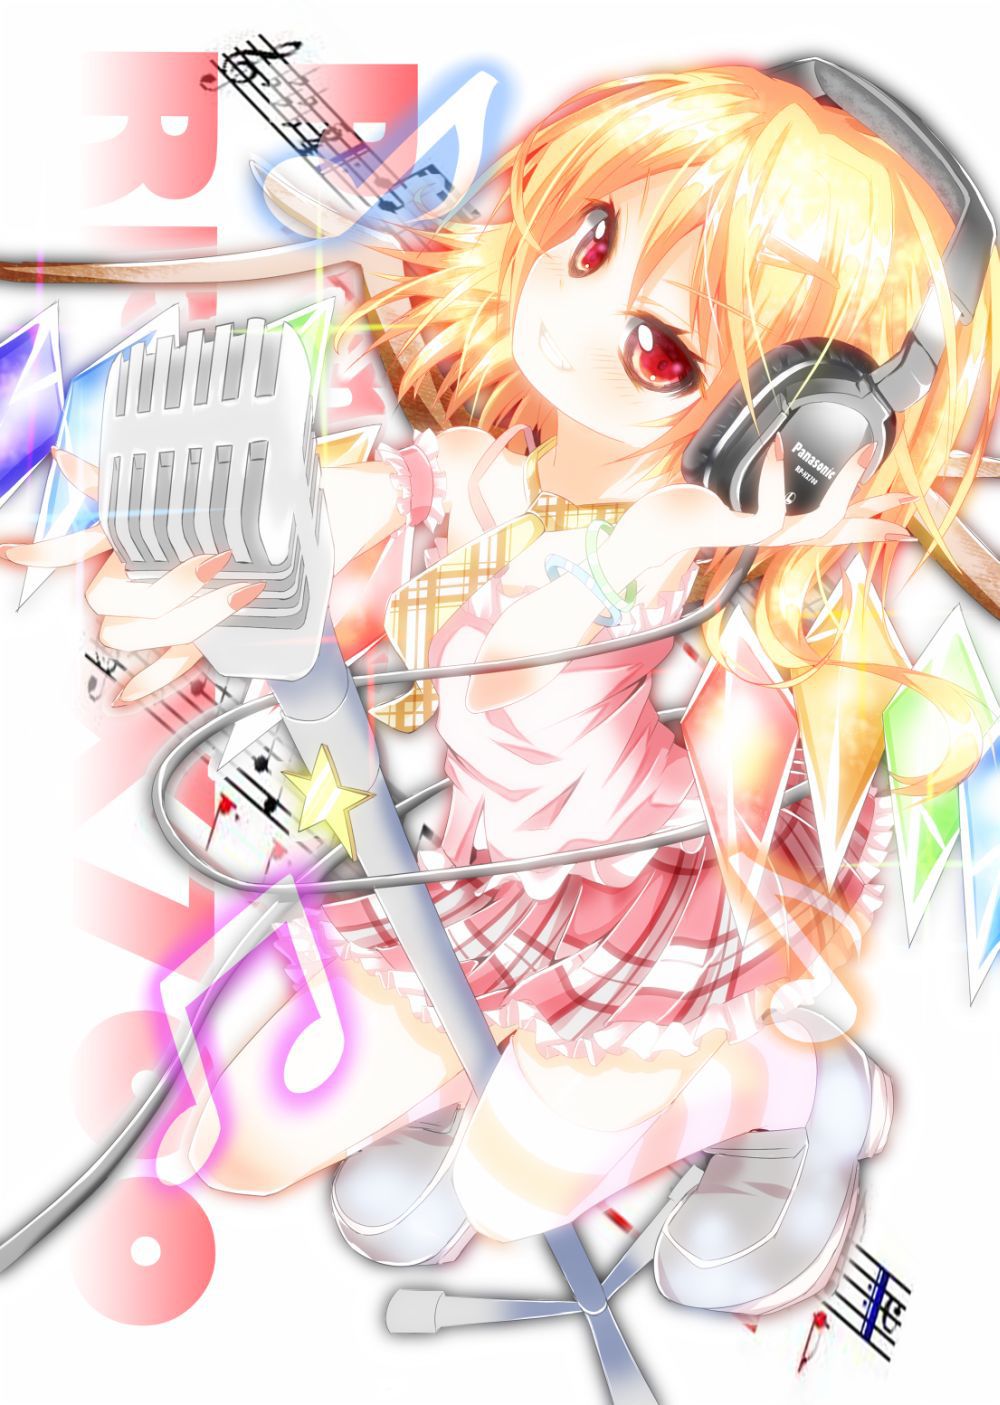 [Secondary] MoE's headphone girl cute picture 40